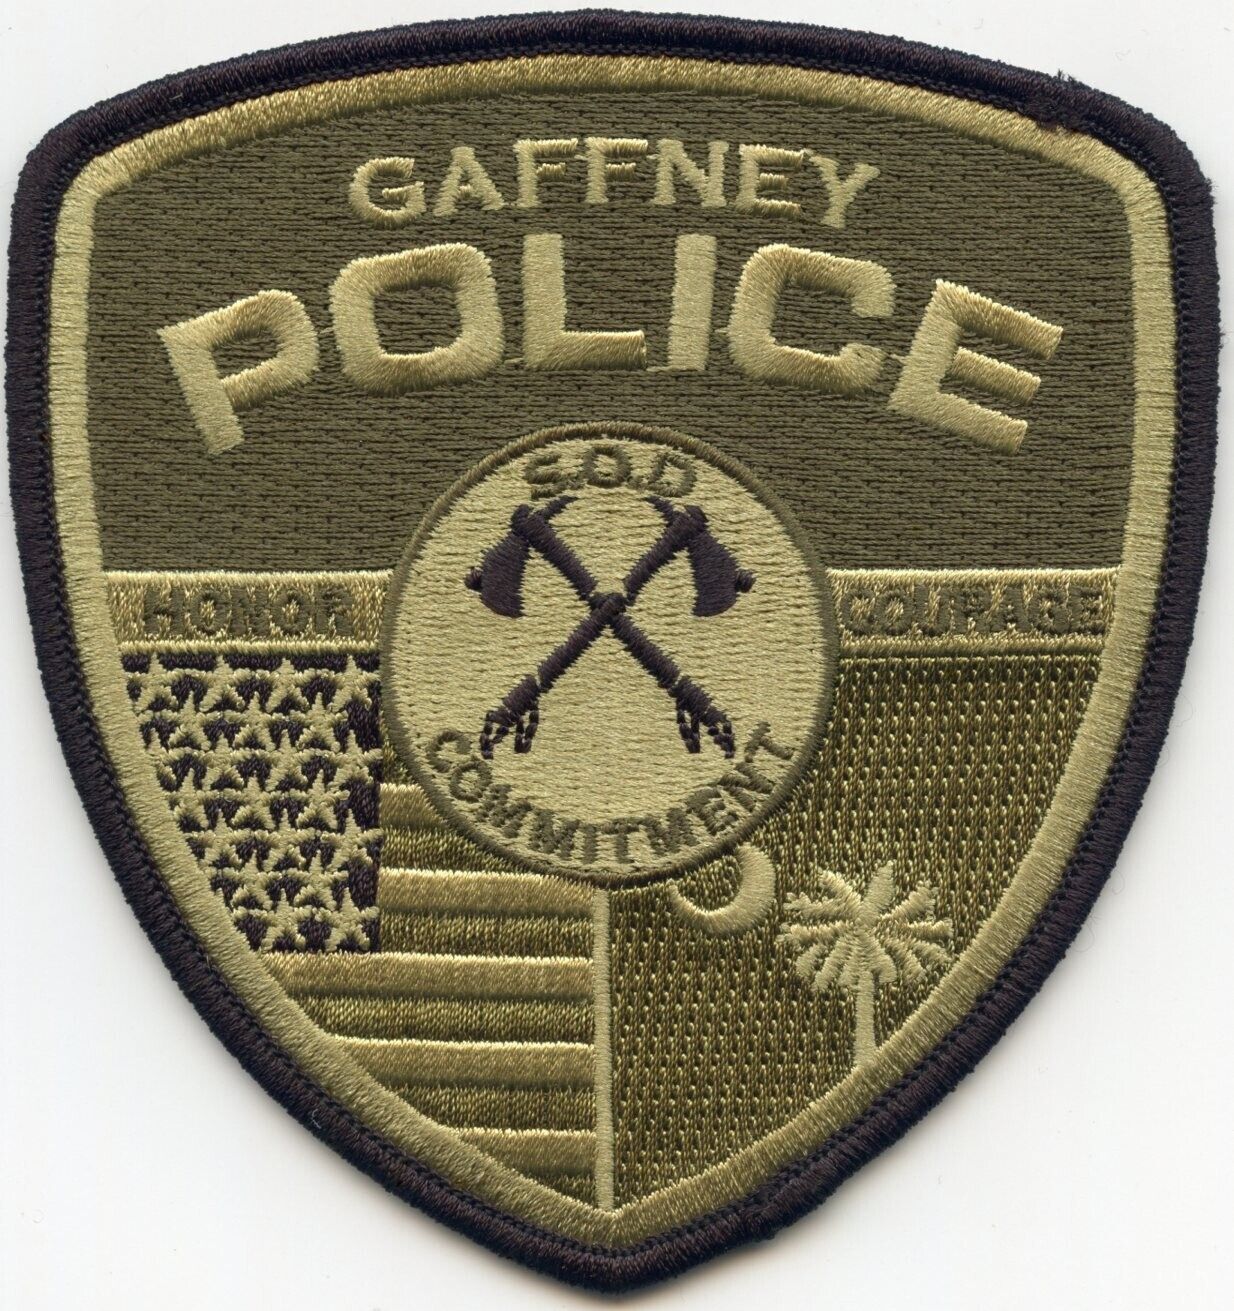 GAFFNEY SOUTH CAROLINA Special Operations Division SOD POLICE PATCH